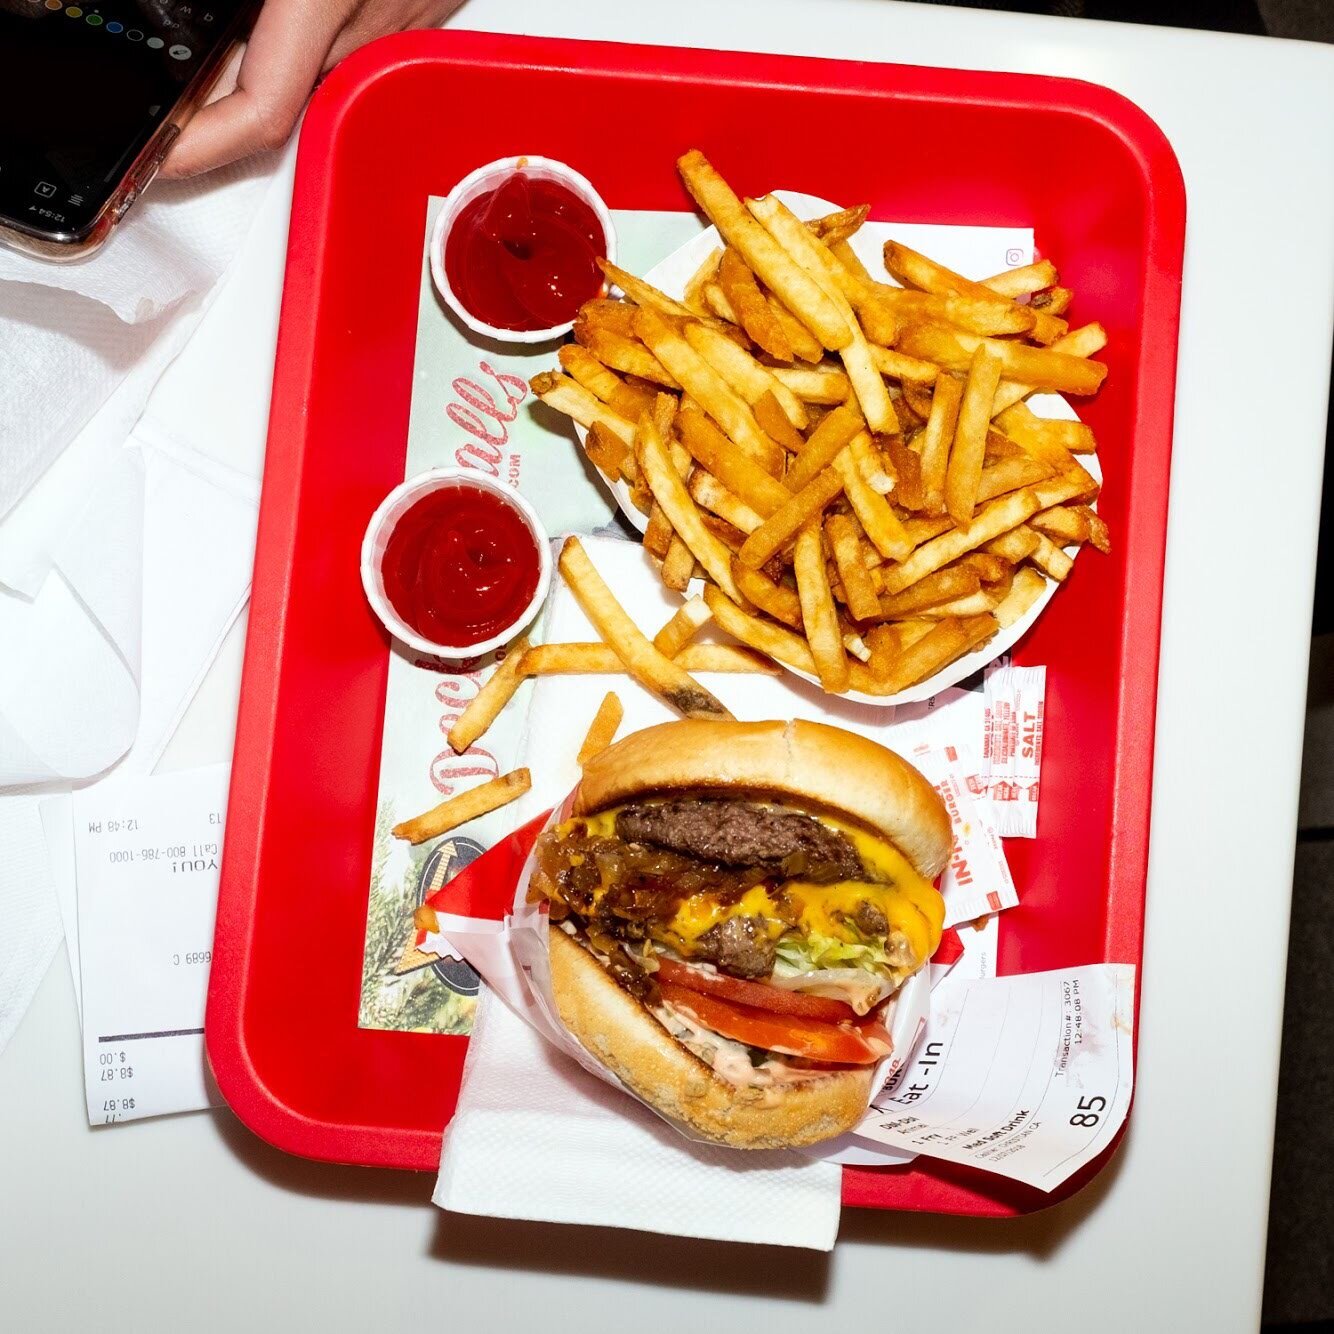 IN-AND-OUT BURGER - LOS ANGELES, CA